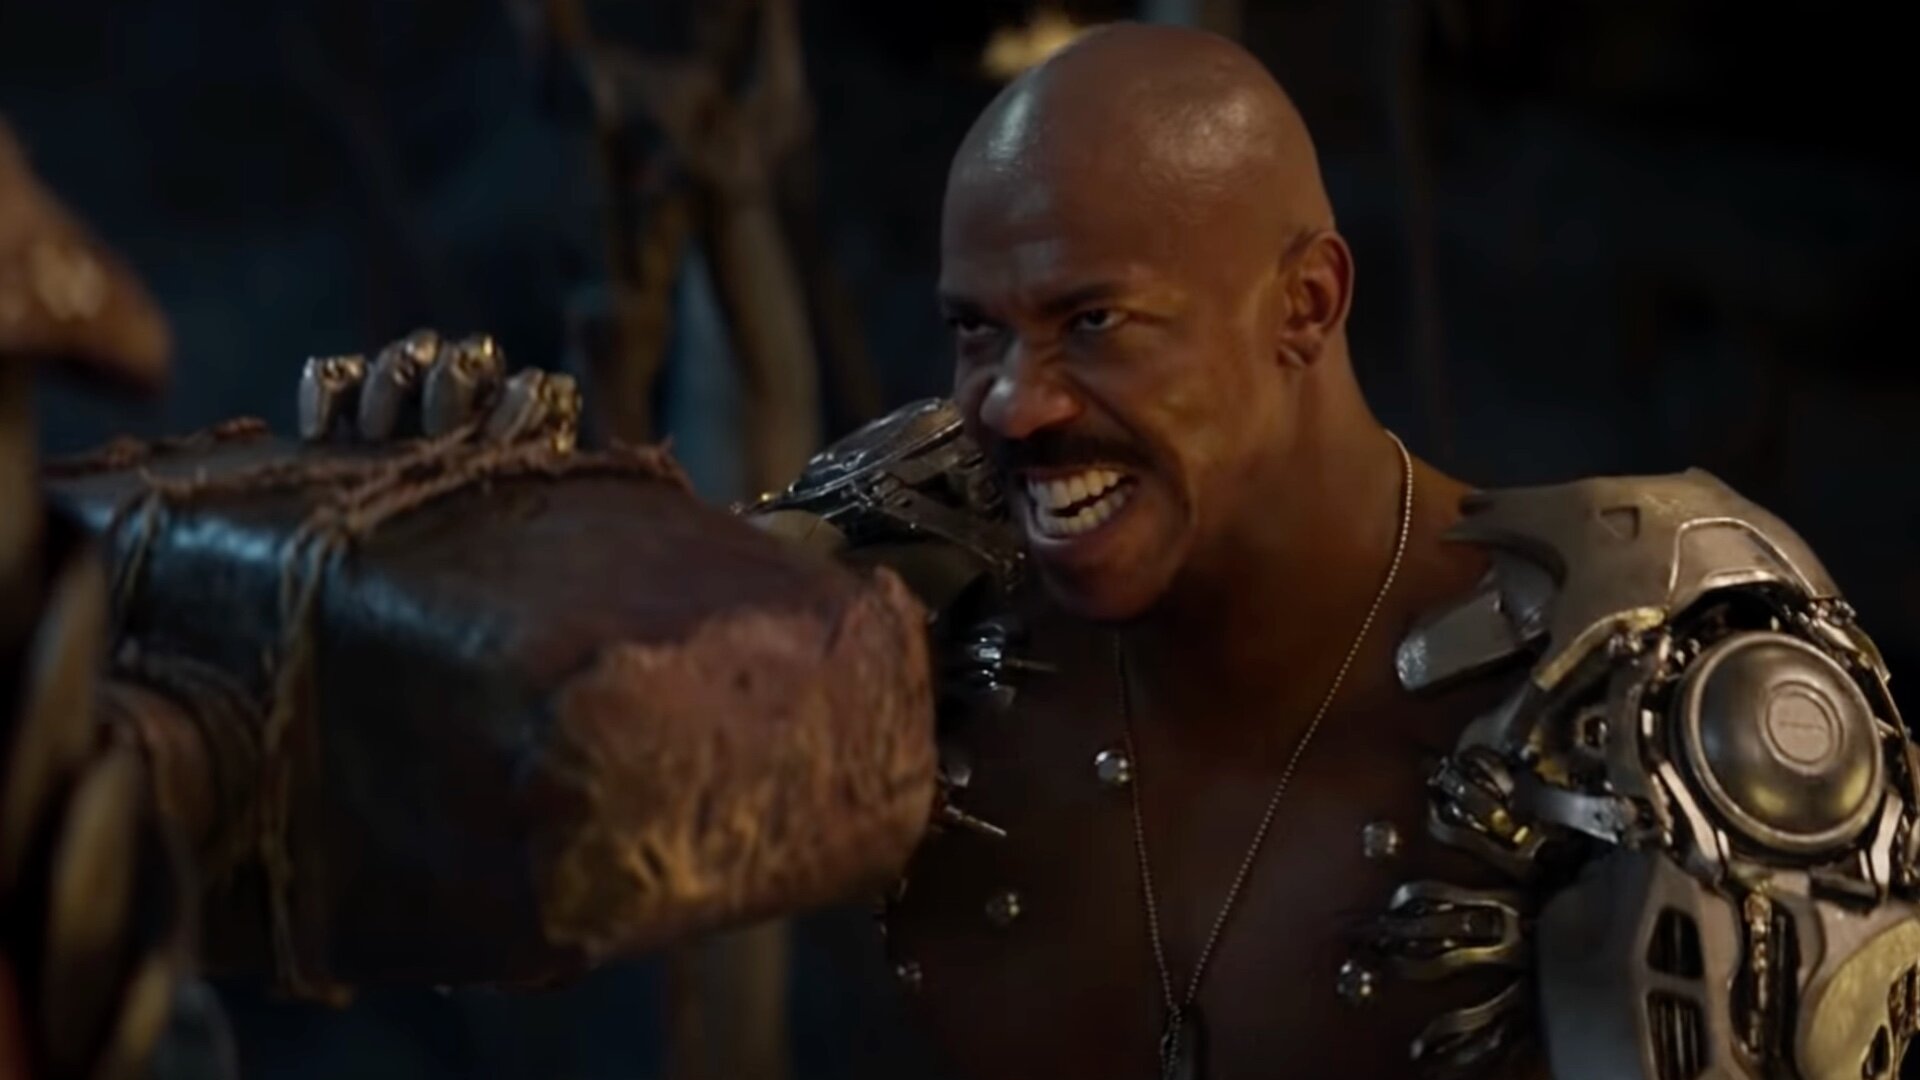 new-mortal-kombat-clip-features-brutal-and-bloody-jax-fatality.jpg